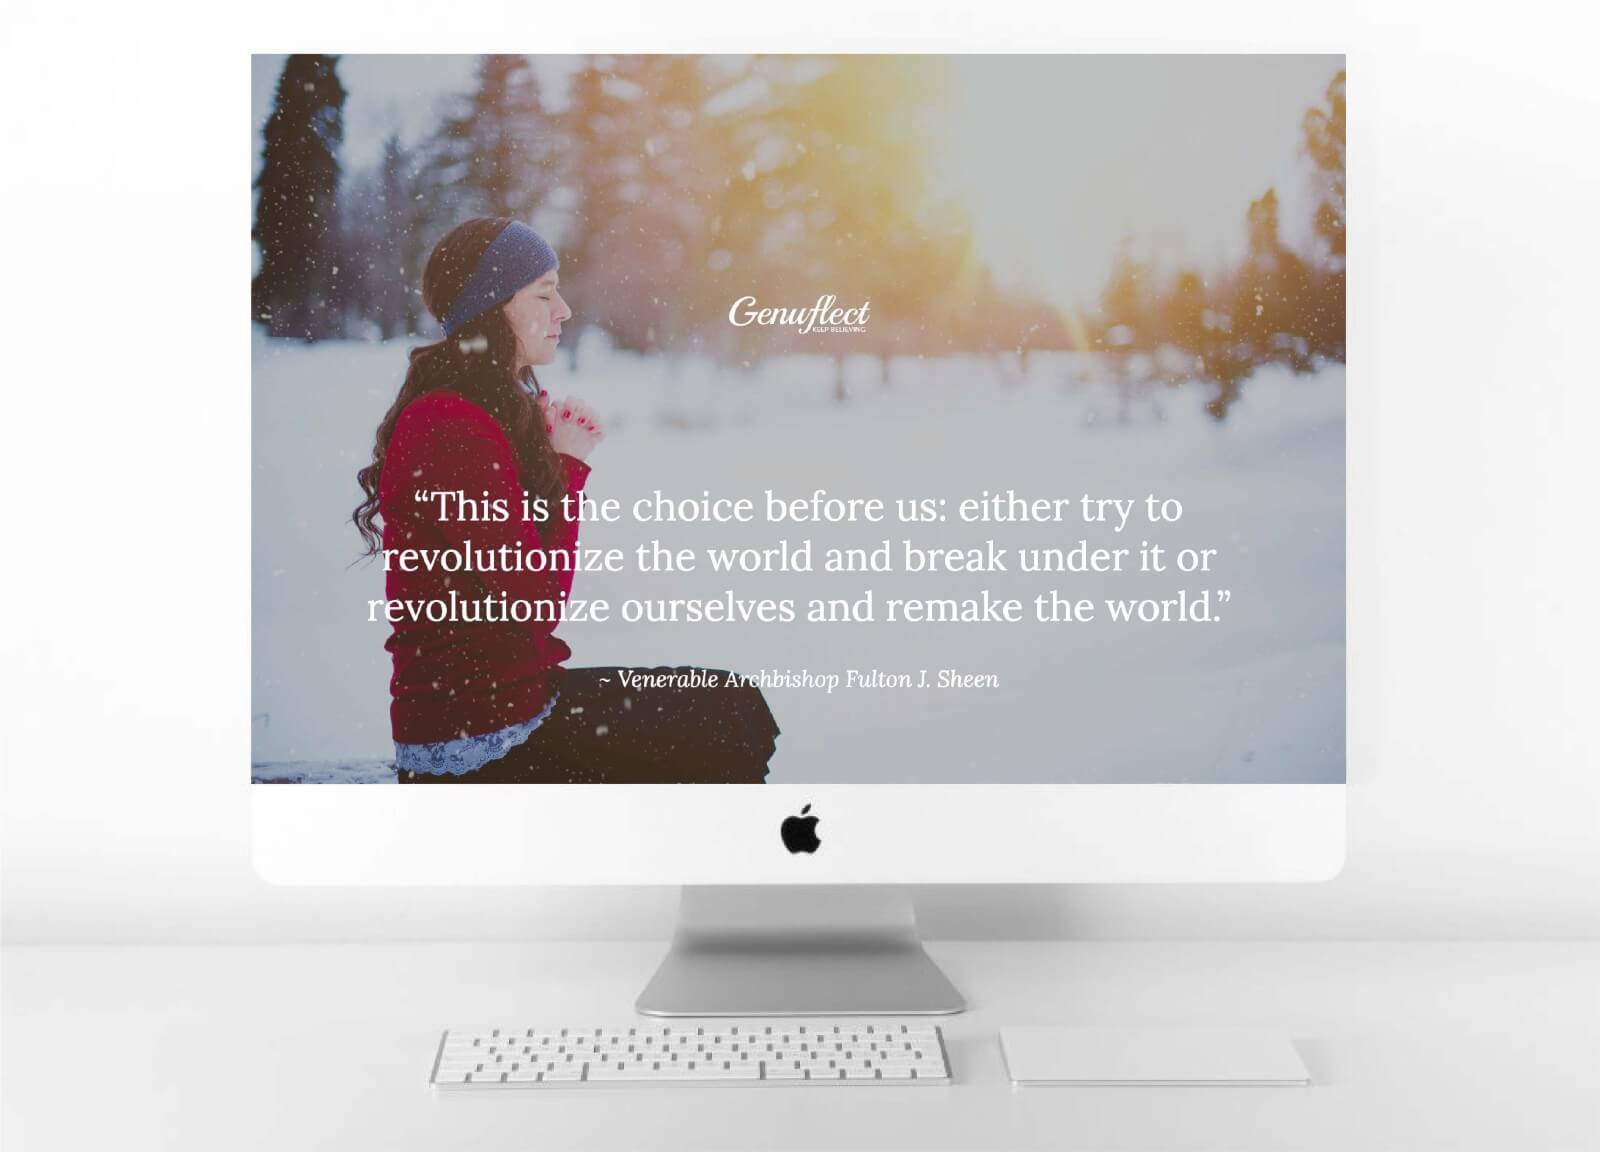 Genuflect computer background image of a Woman sitting in the snow outside with head bowed and hands folded in prayer